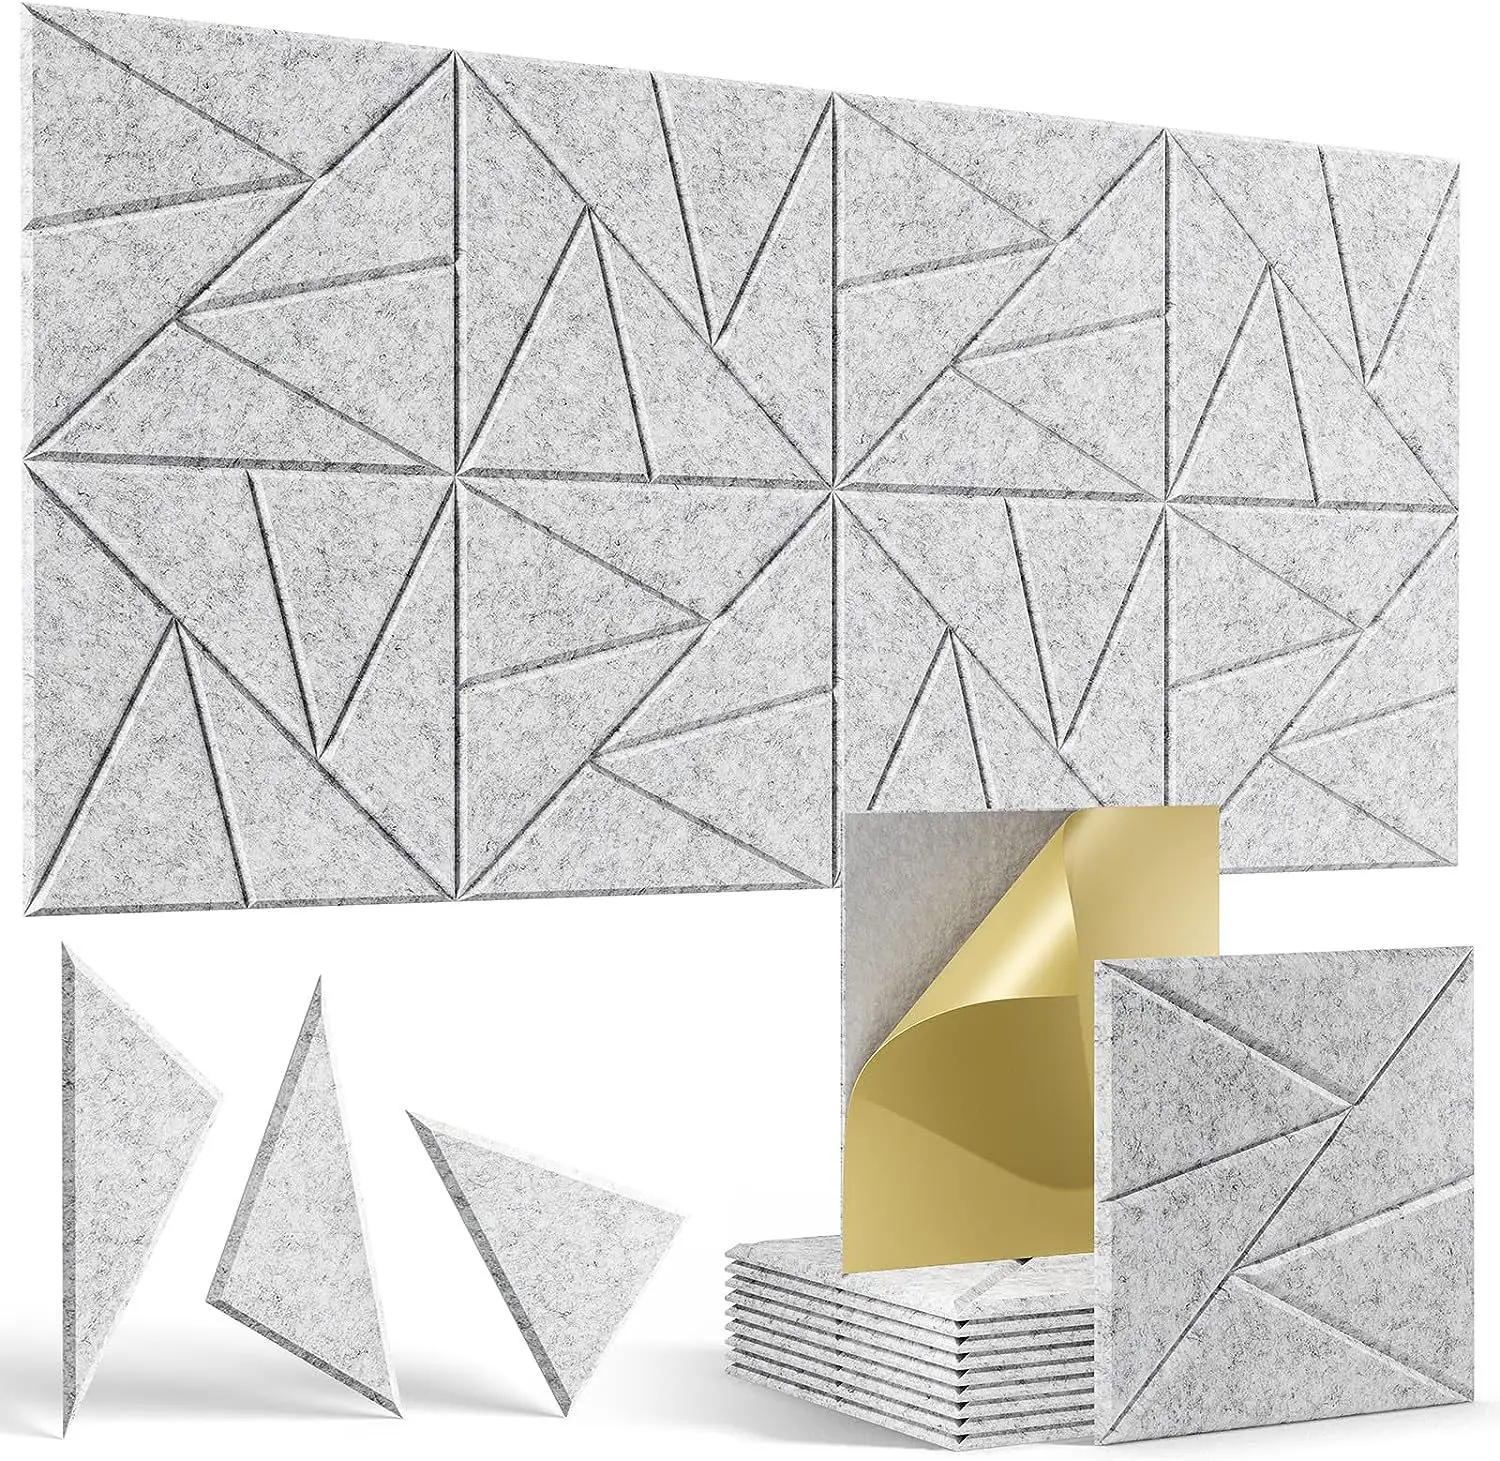 30cm Sound Proof Foam Acoustic Panels With Self-adhesive Decorative Soundproof Wall Panel Sound Absorbing Tile For Home Offices